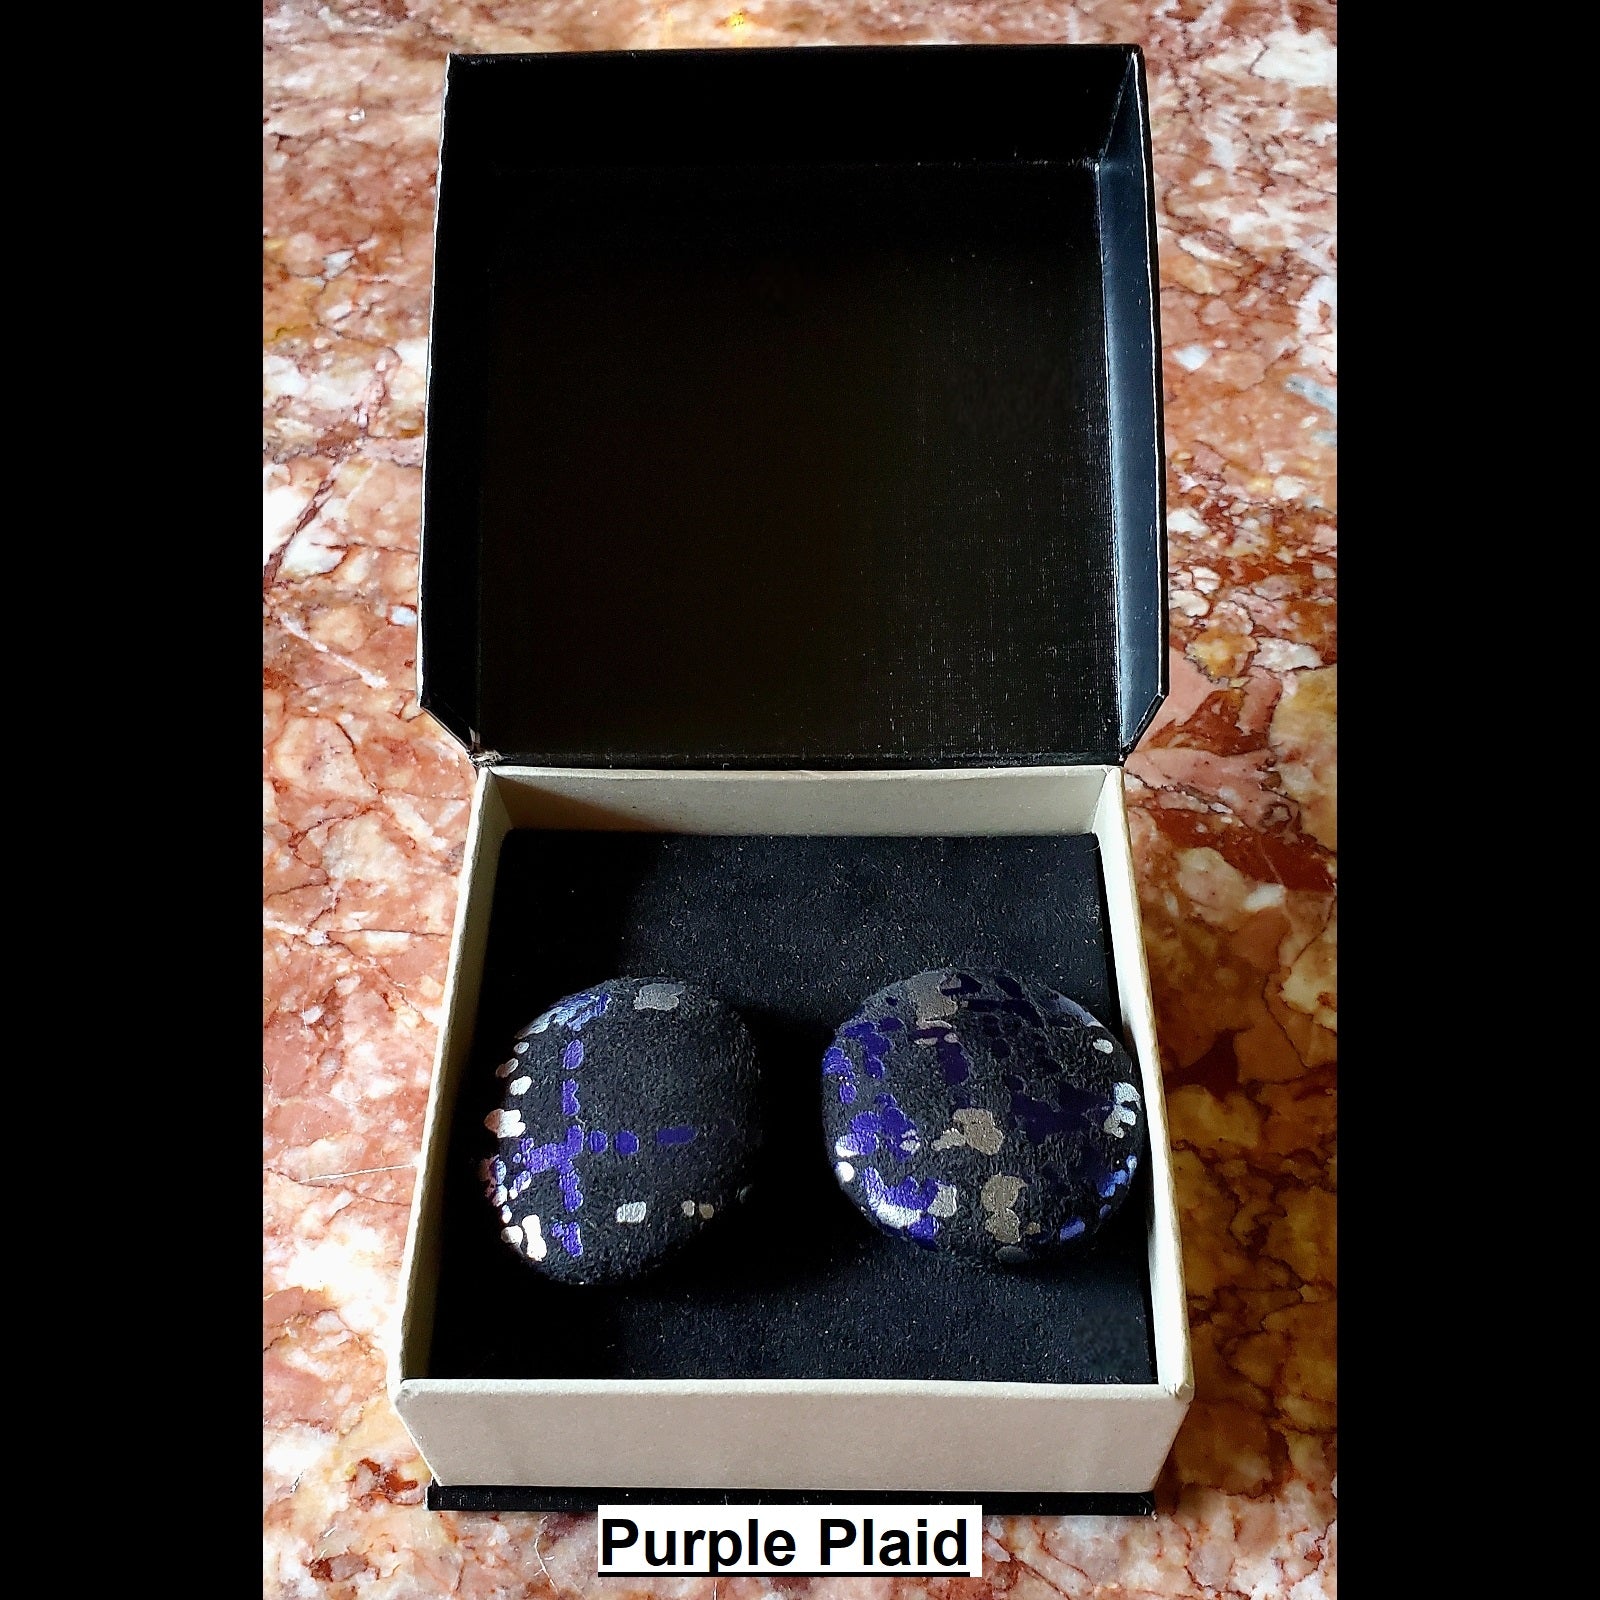 purple and silver plaid print button earrings in jewelry box